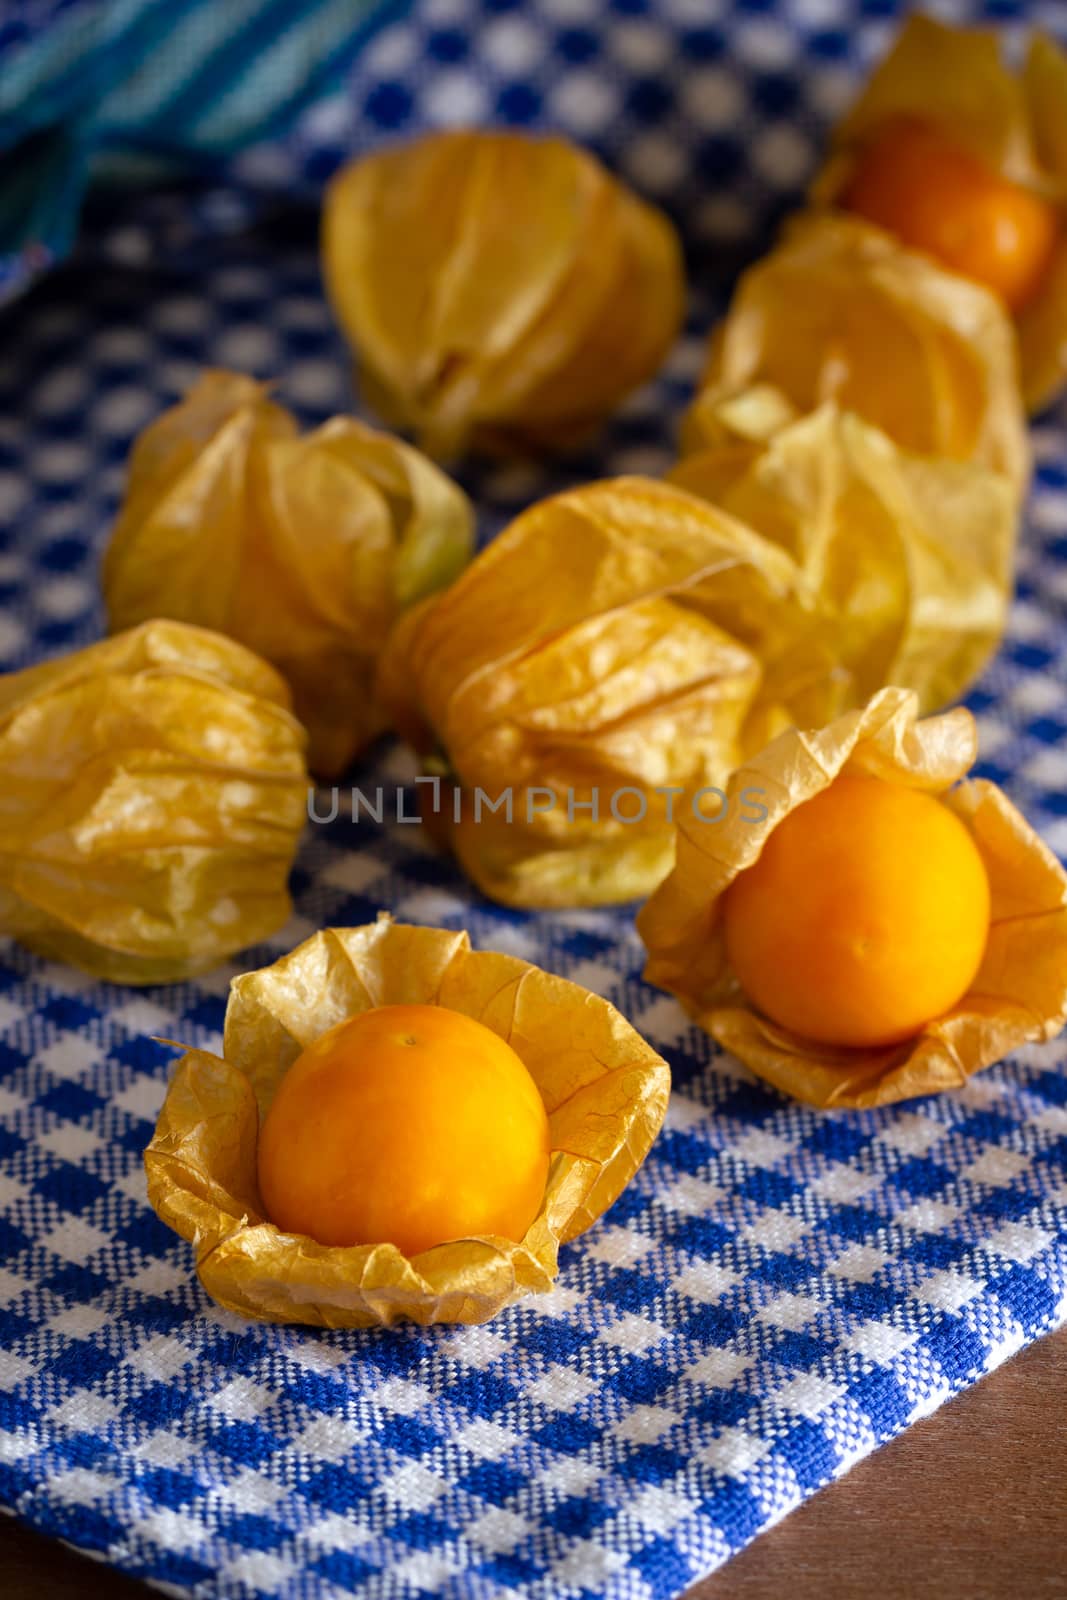 Cape gooseberry on blue tablecloth. Concept of health care or herb.